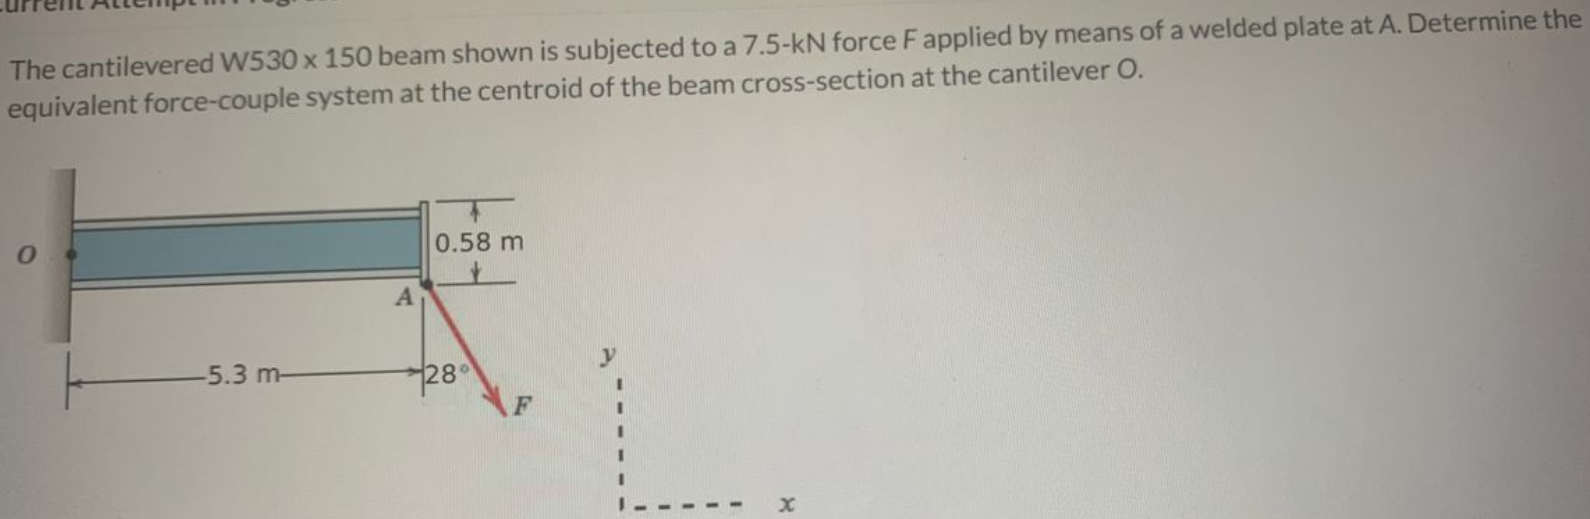 The cantilevered W530 x 150 beam shown is subjected to a 7.5-kN force F applied by means of a welded plate at A. Determine the
equivalent force-couple system at the centroid of the beam cross-section at the cantilever O.
0.58 m
-5.3 m-
7280
F
